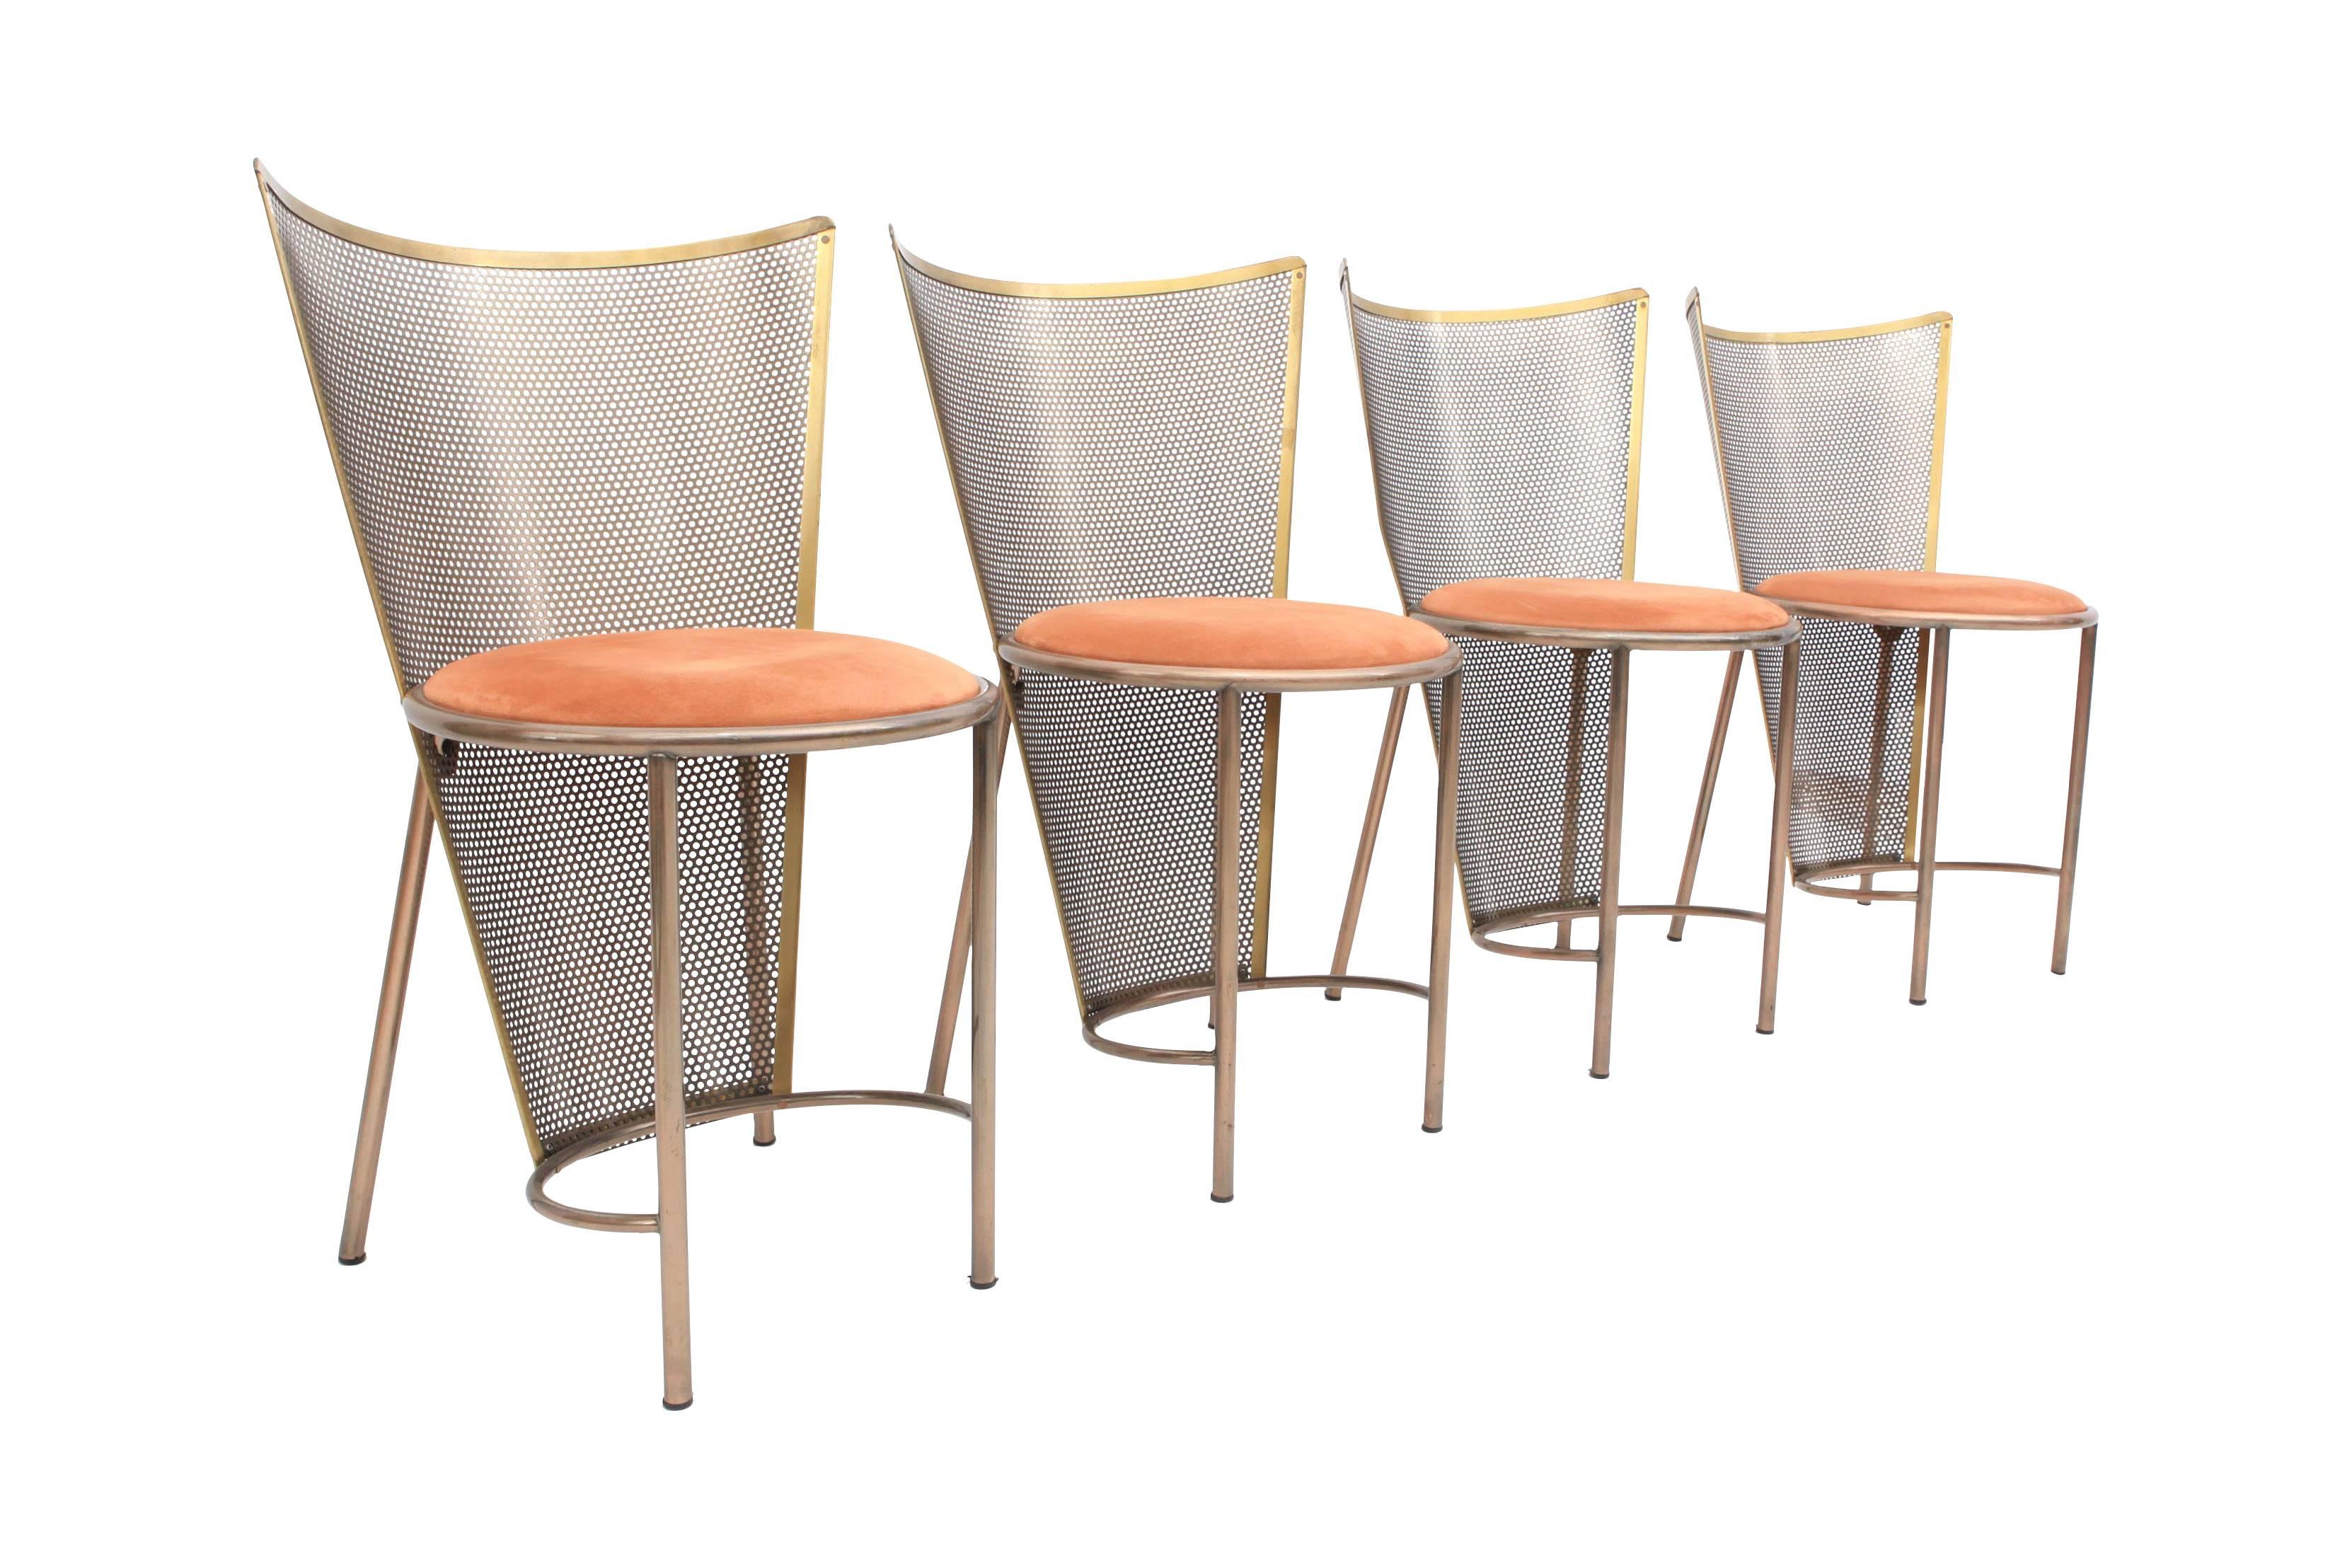 Late 20th Century Post-modern Frans Van Praet Limited Edition Expo '92 Brass Chairs